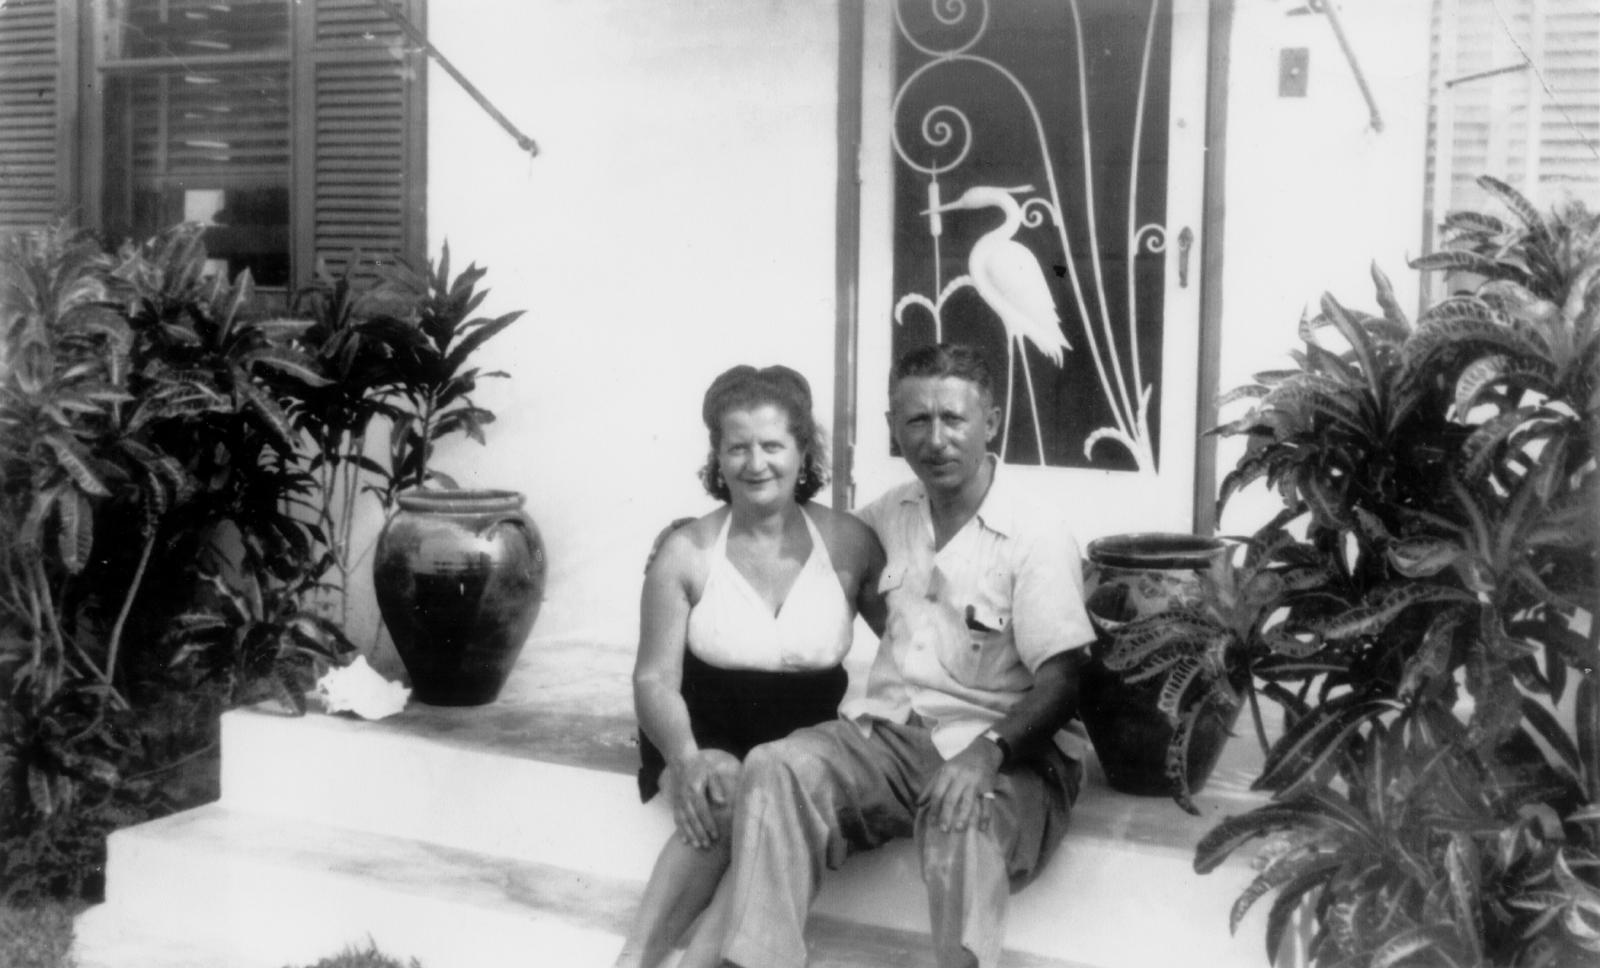  My mother and father, Florida, 1951. 